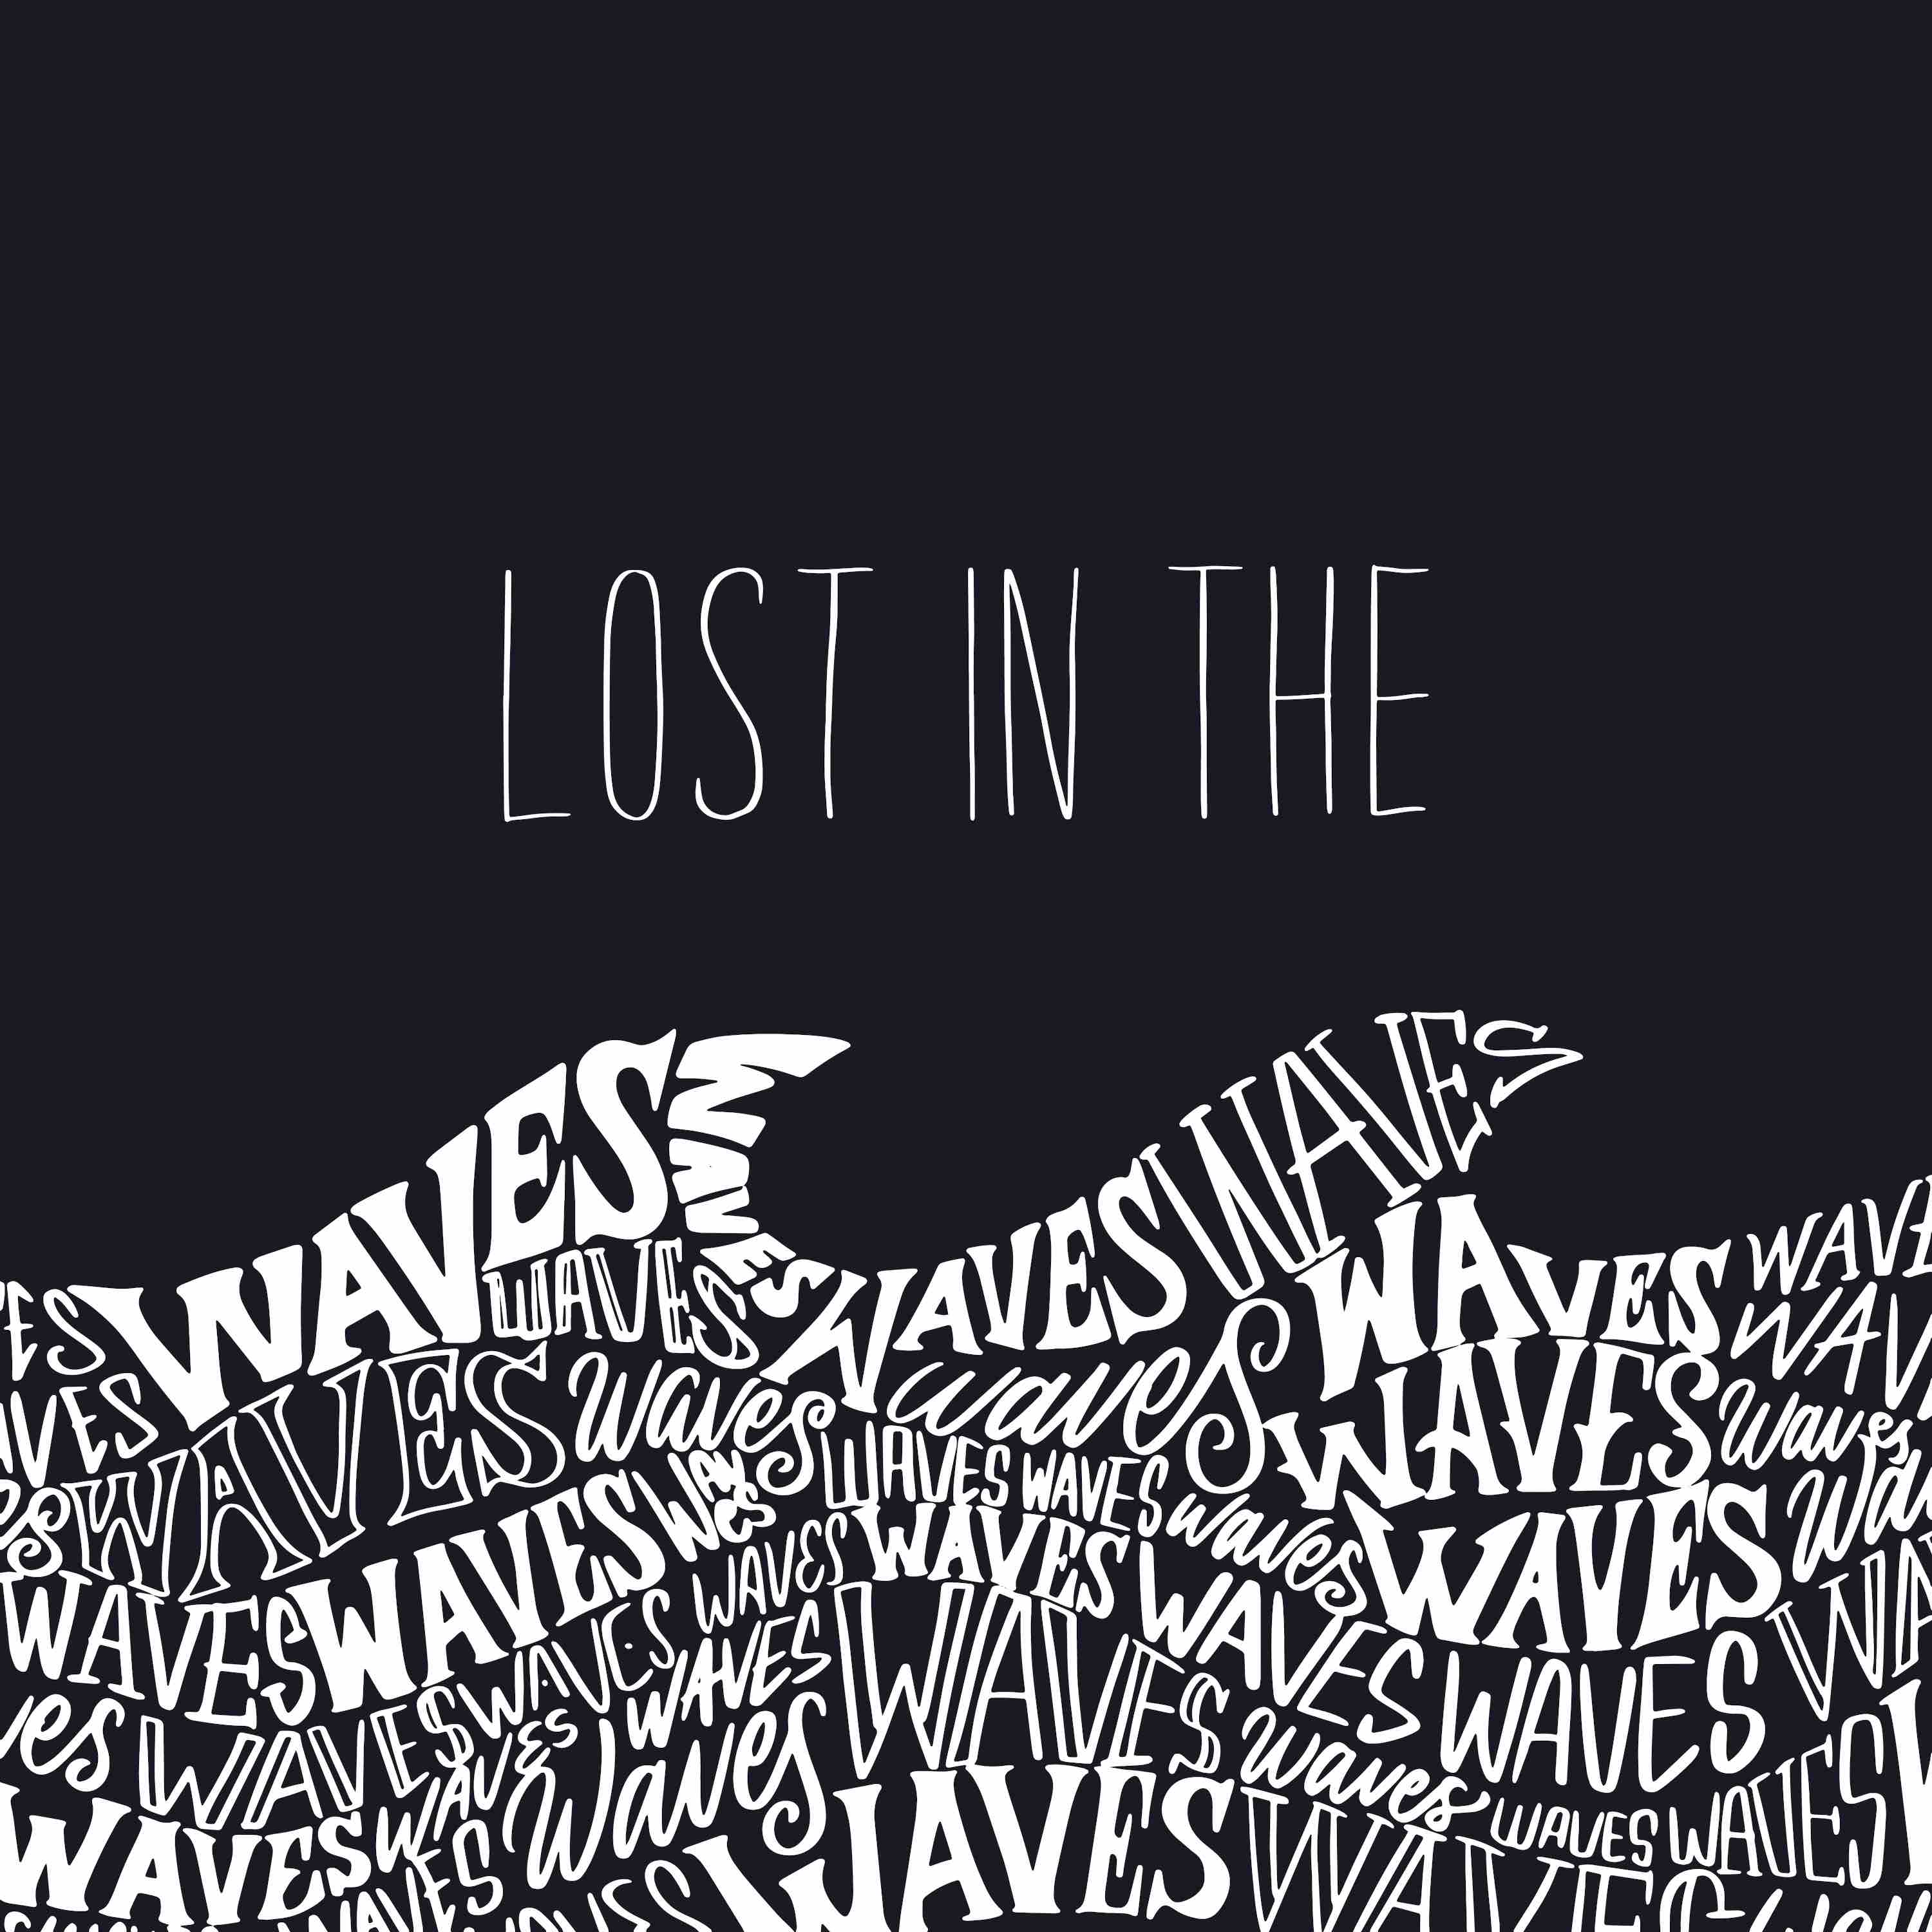 Lost in the Waves